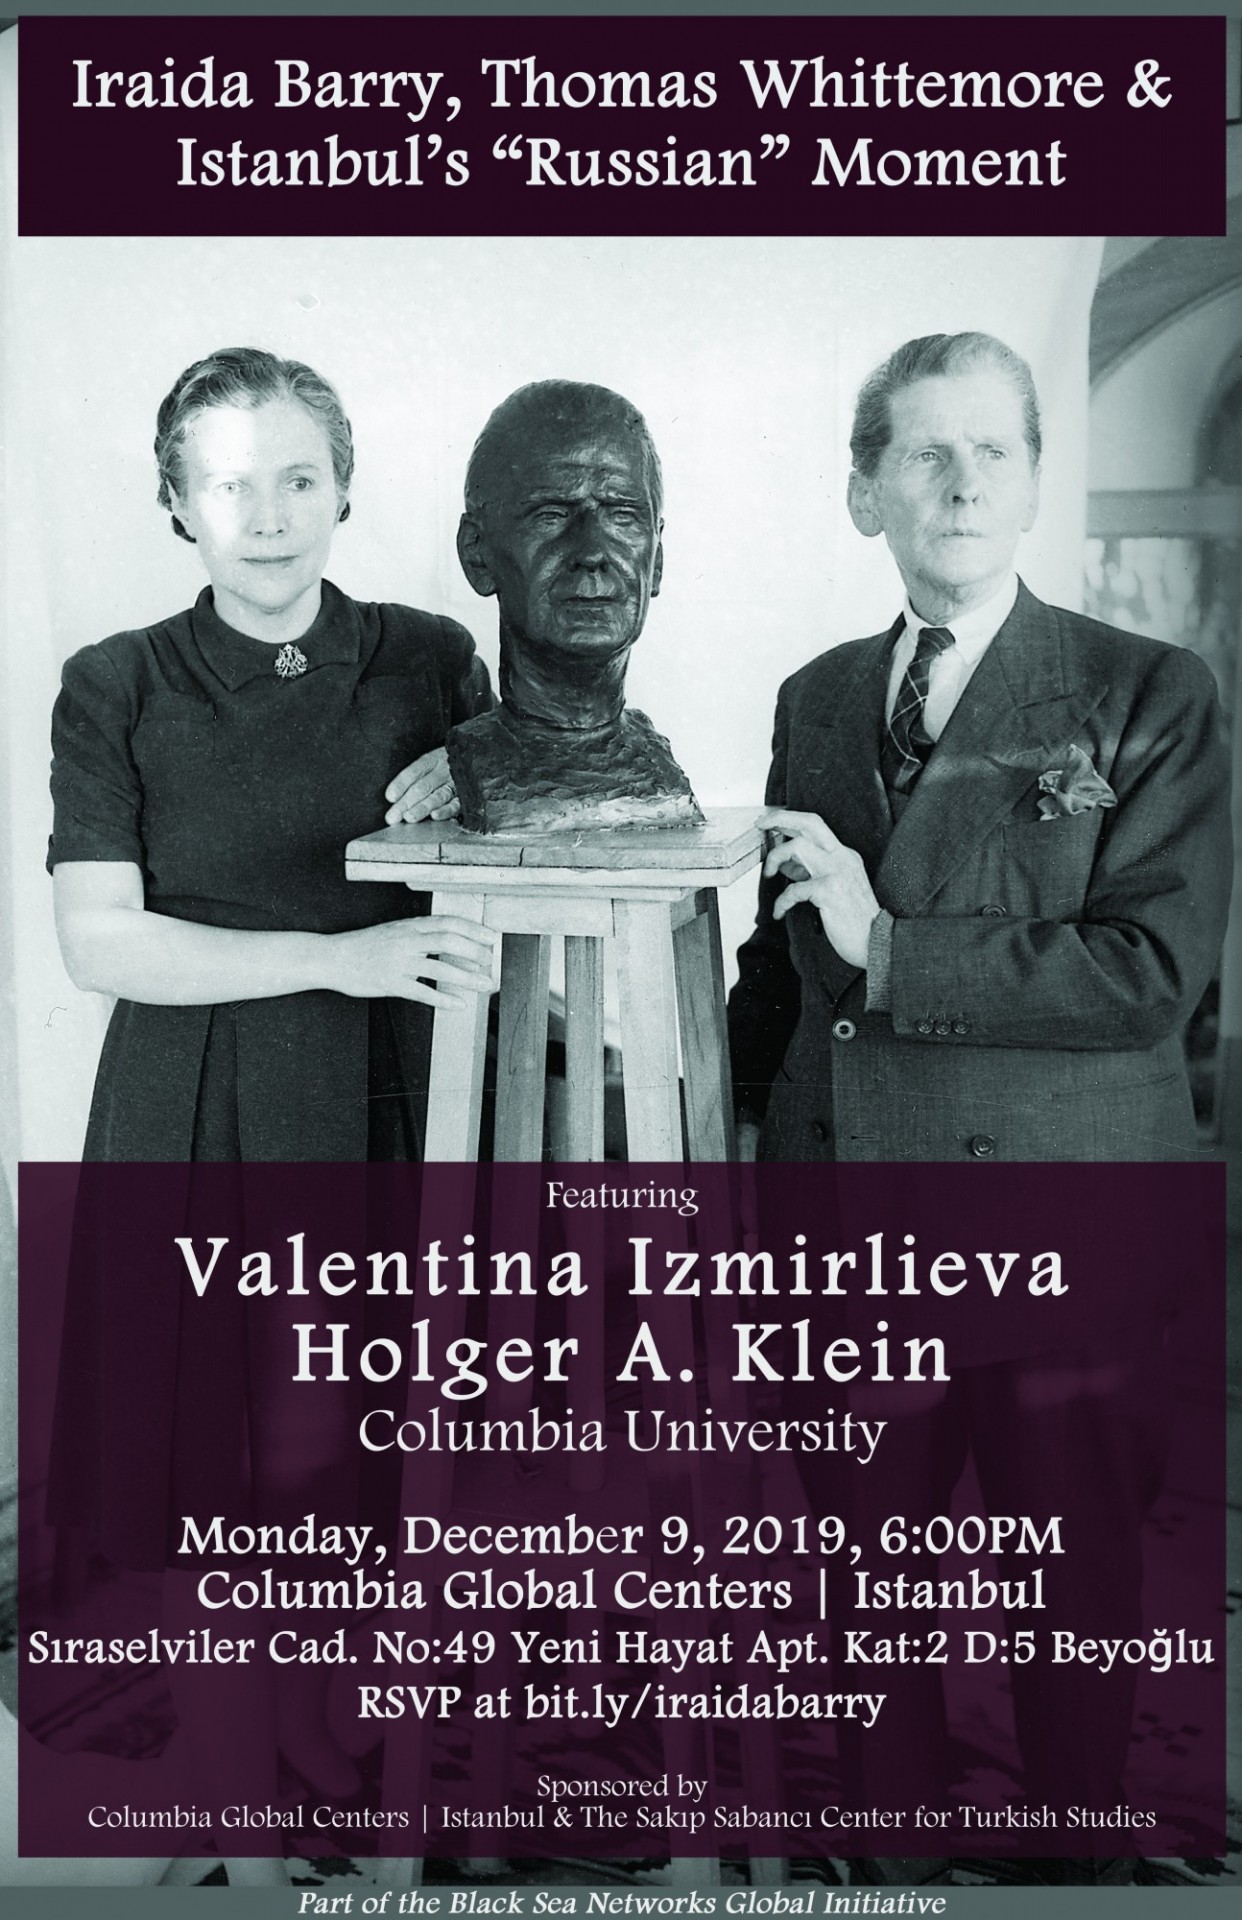 Flyer advertising event, with image of Iraida Barry and Thomas Whittemore posing beside a bust